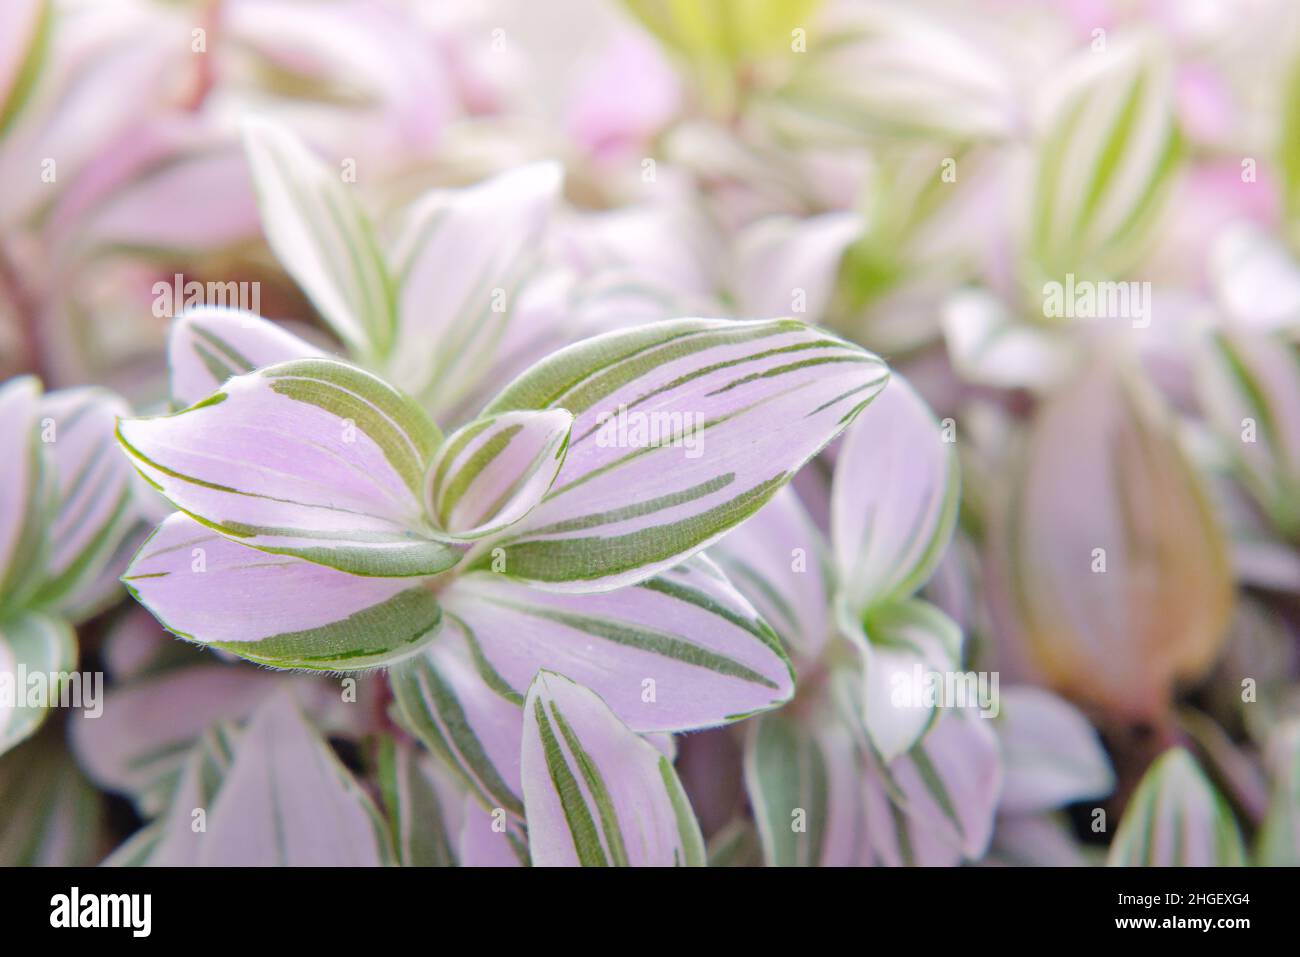 Tradescantia albiflora Nanouk tender variegated pink, green and purple leaves pattern. Multicolor nature background. Stock Photo